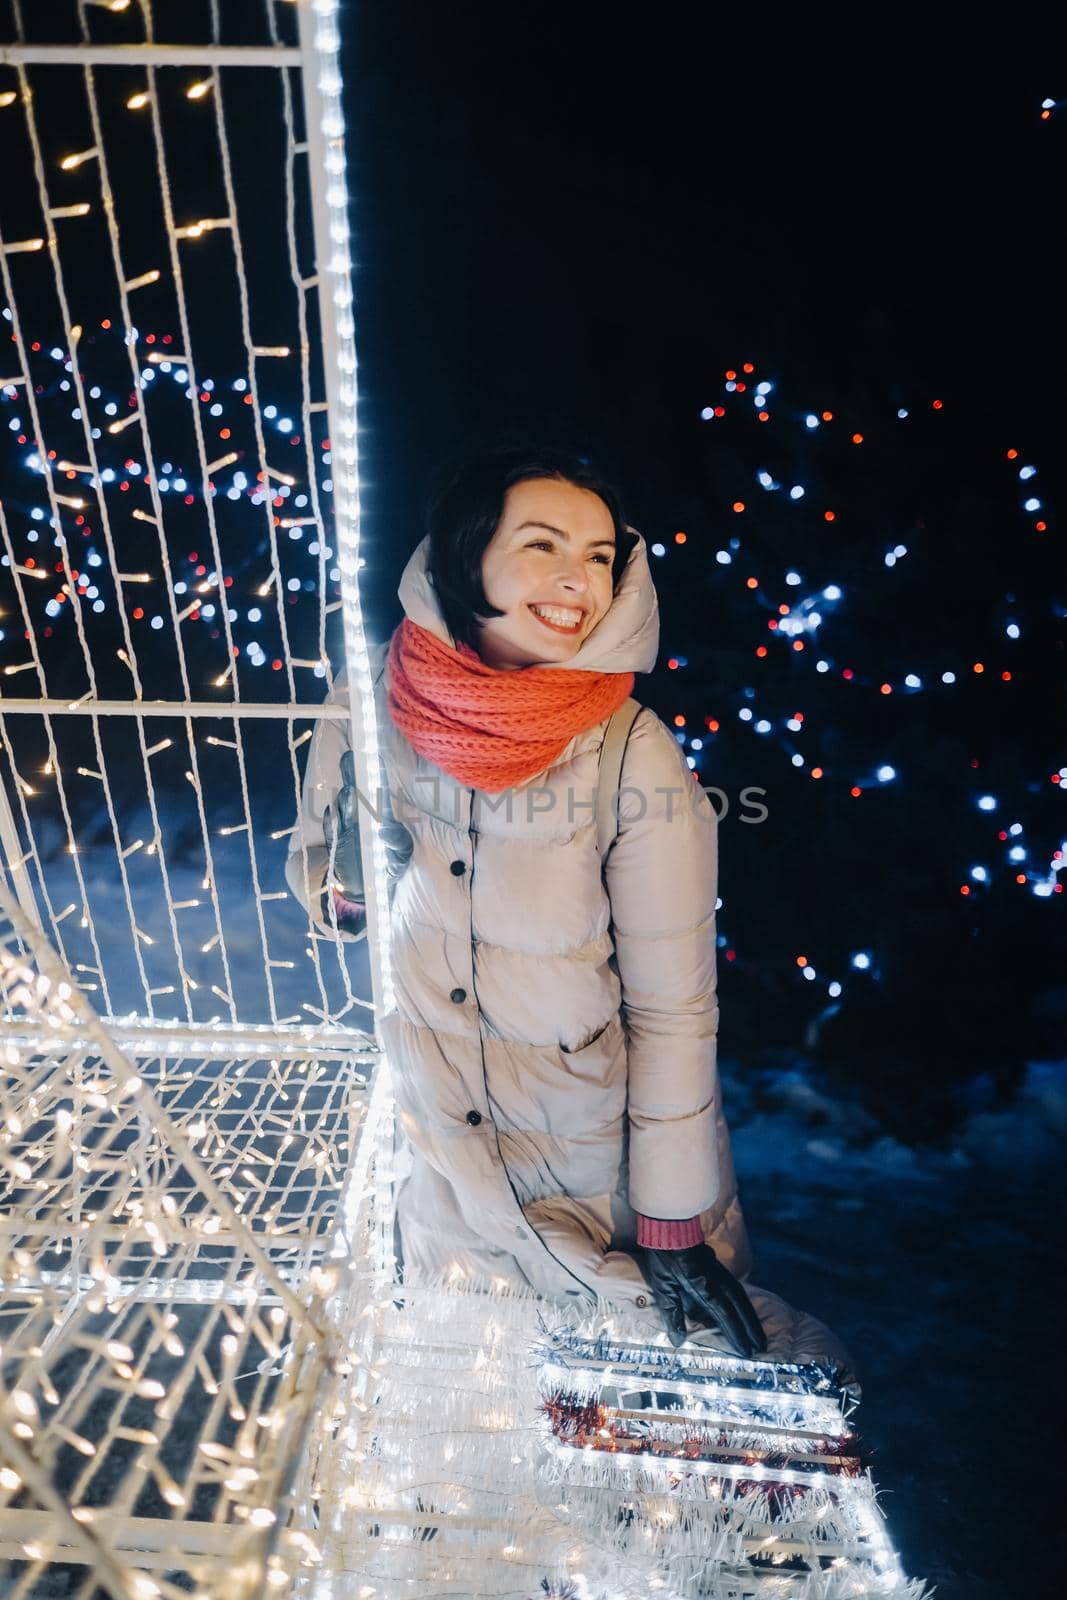 a girl in a gray jacket in winter with evening lights burning on Christmas street.